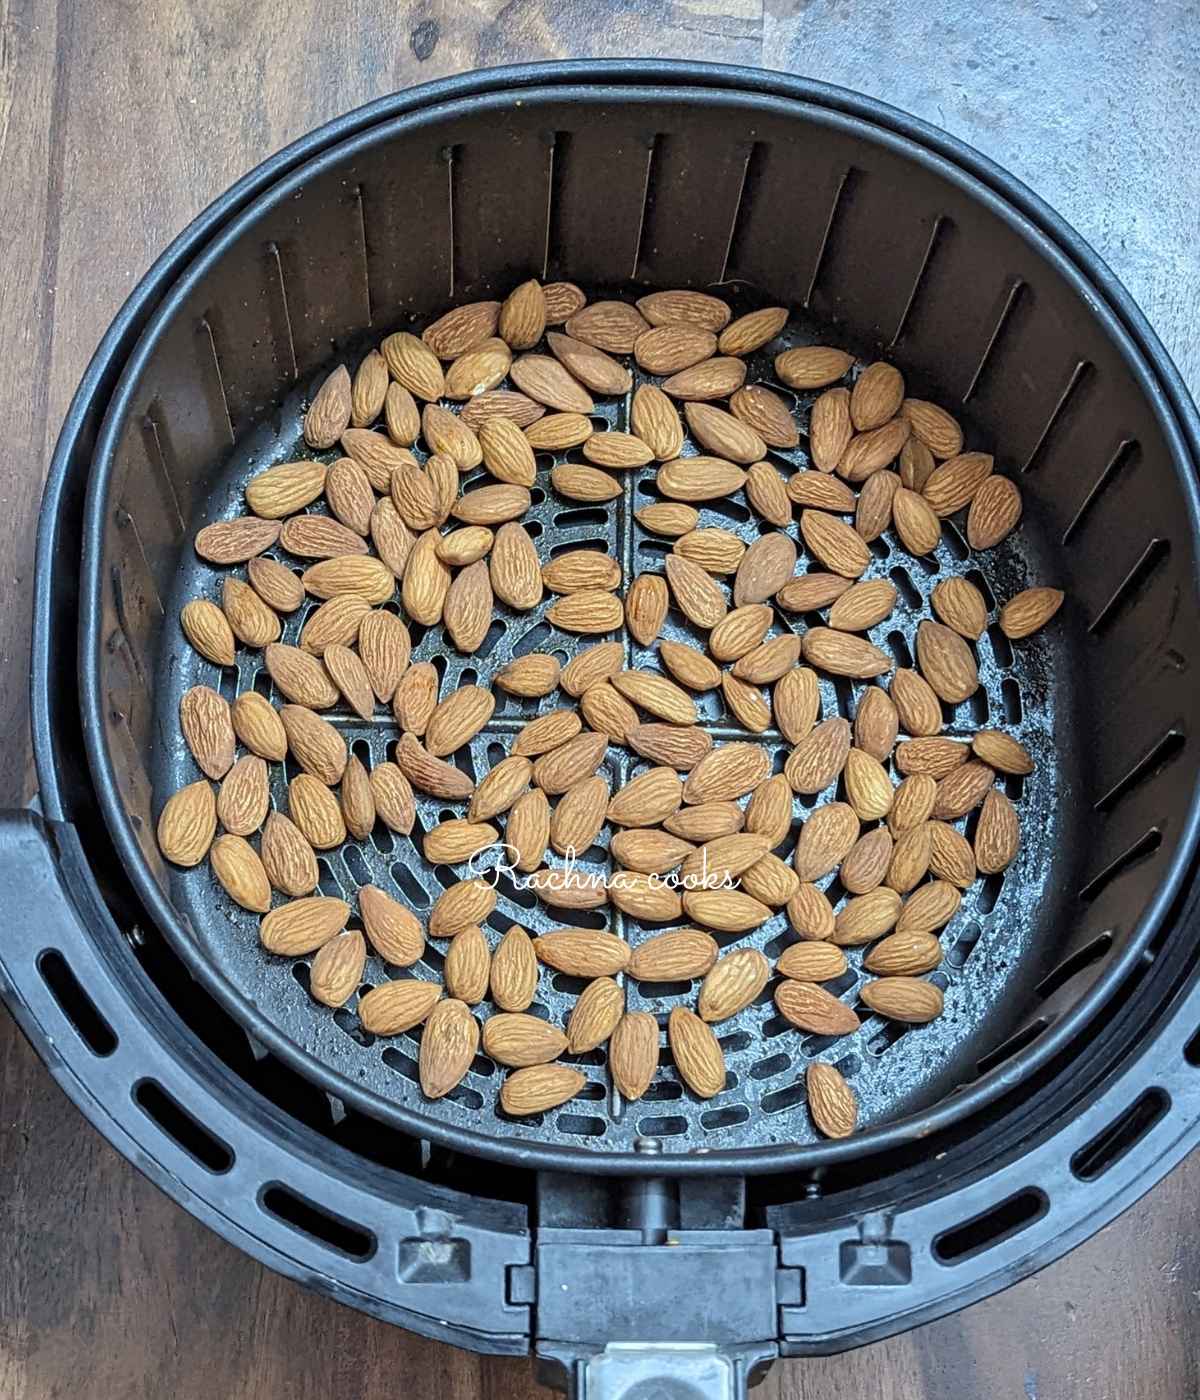 1 cup of almonds laid out in air fryer basket.